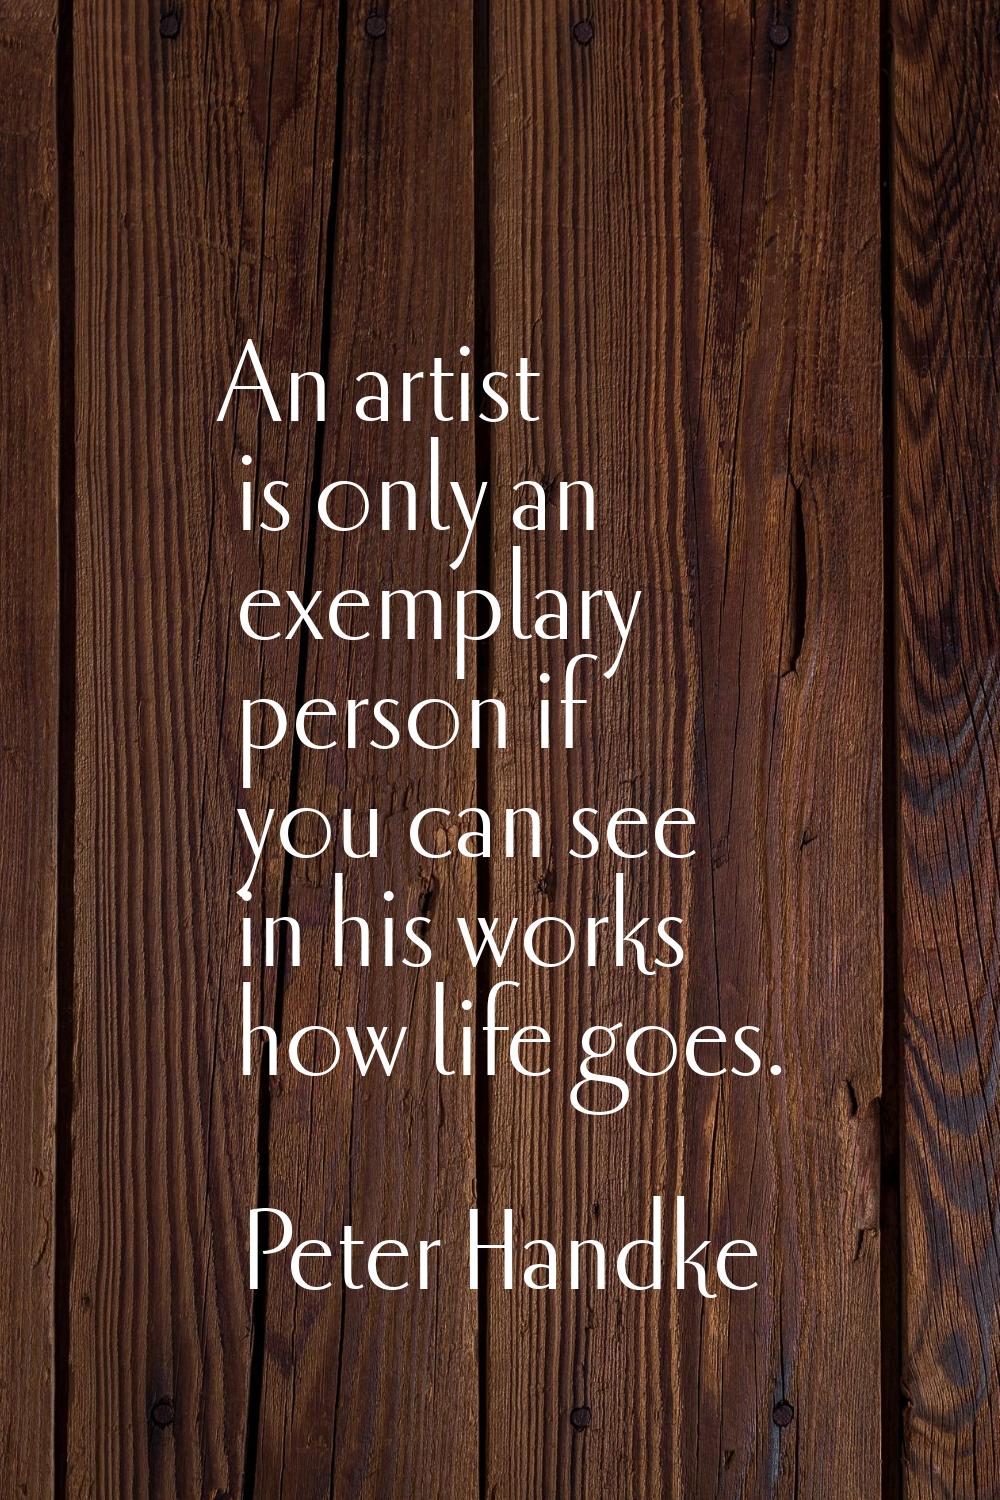 An artist is only an exemplary person if you can see in his works how life goes.